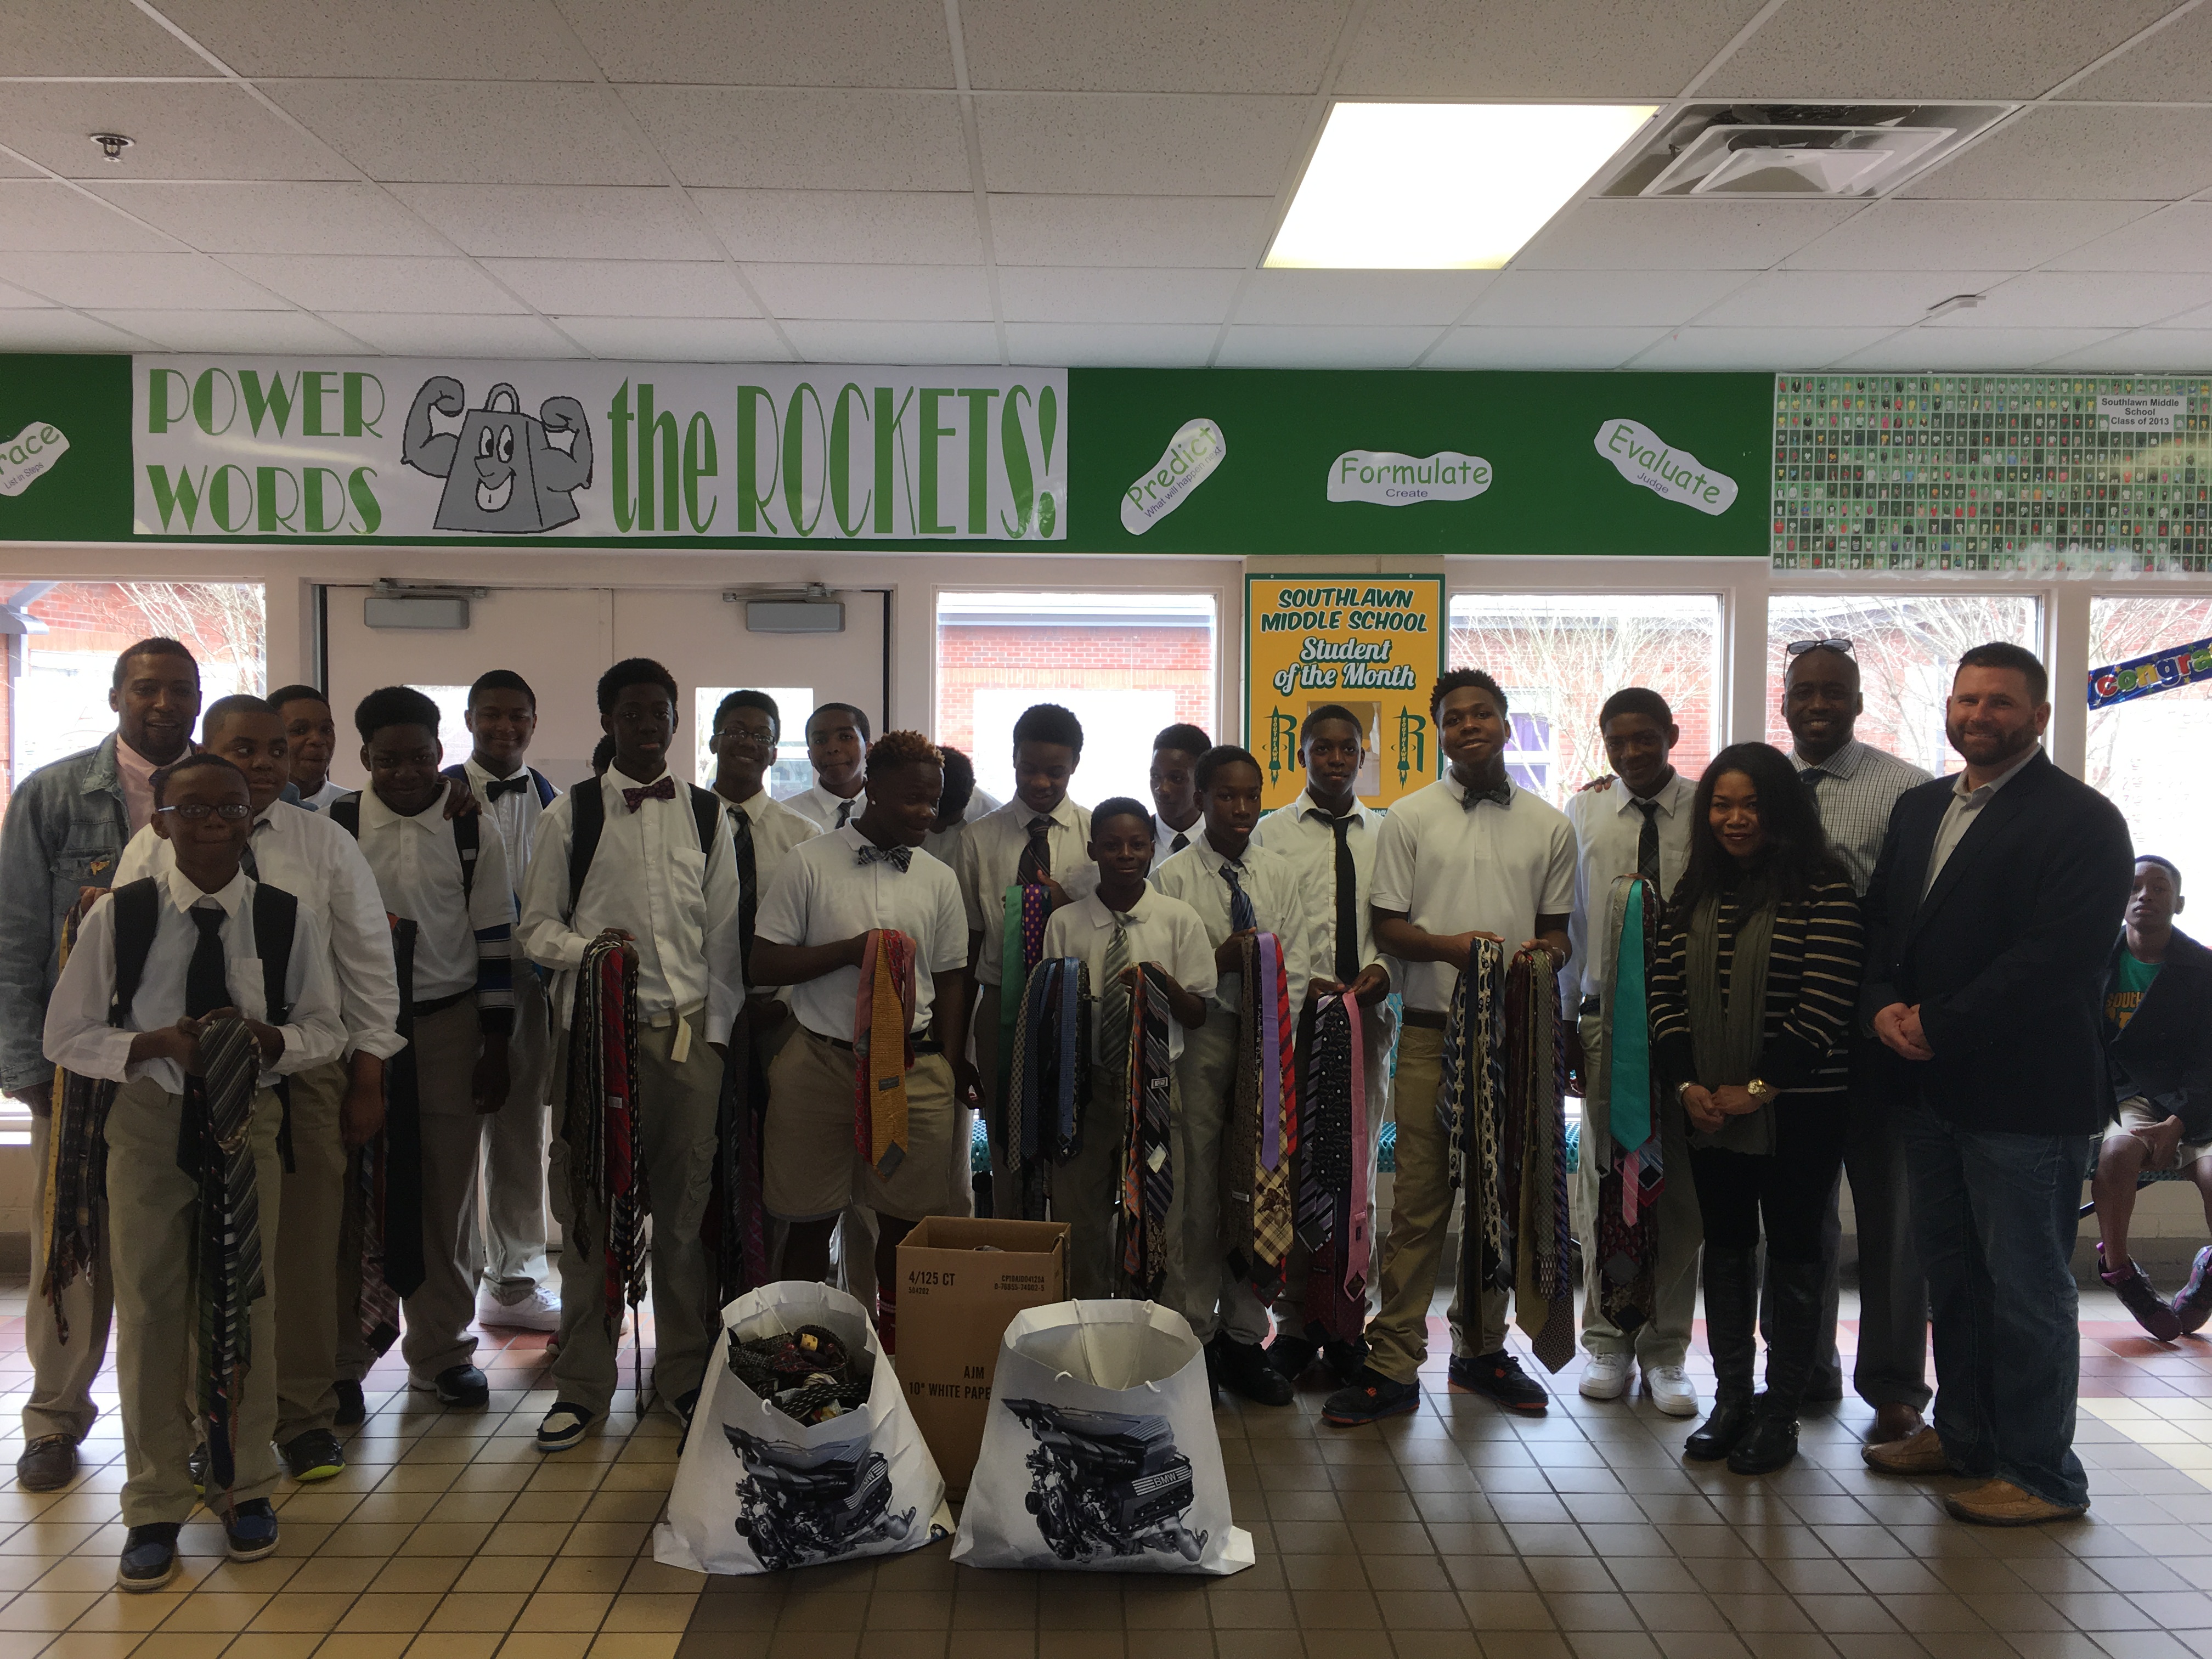 Over 500 Neckties Donated to Southlawn Middle